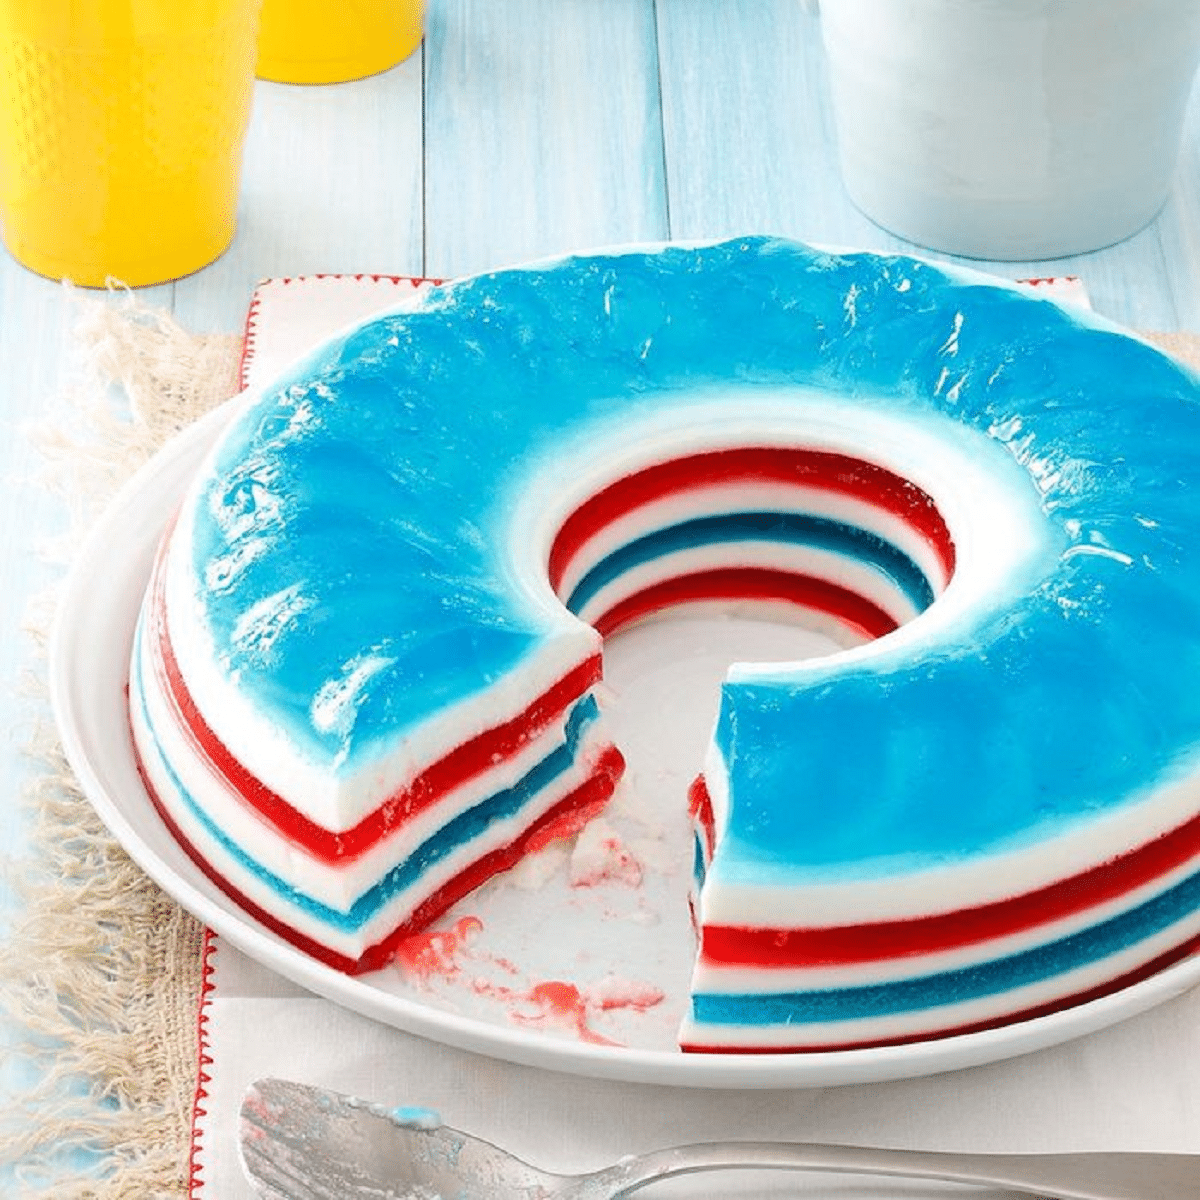 Layered red white and blue gelatin ring with slice cut out on white plate by spoon